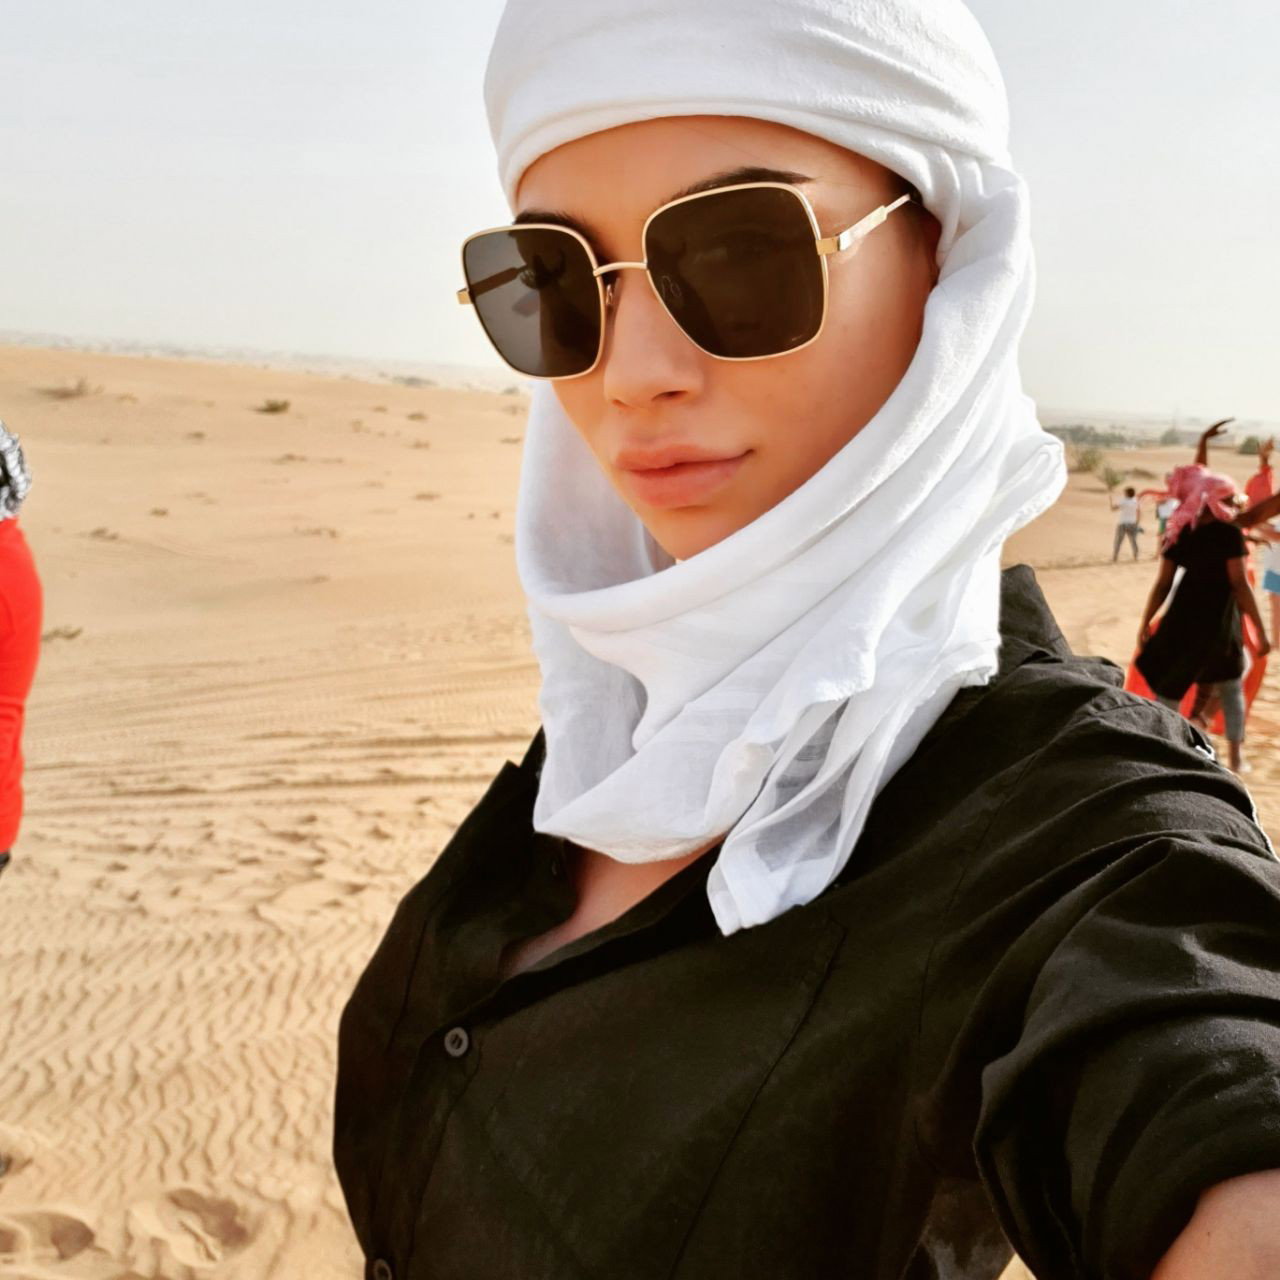 Photo by SereneSophie with the username @SereneSophie, who is a star user,  May 3, 2019 at 11:36 AM and the text says '#DubaiDiaries #SereneSophie #DubaiLife

I'm wandering through the desert🏜🌞... the thirst for🔭exploration never stops🎒👠💎 until I'll find my💗oasis of happiness💋

#FridayFeeling 🔛 #MyStory @ http://bit.ly/SereneSophie 🔥🔥🔥'